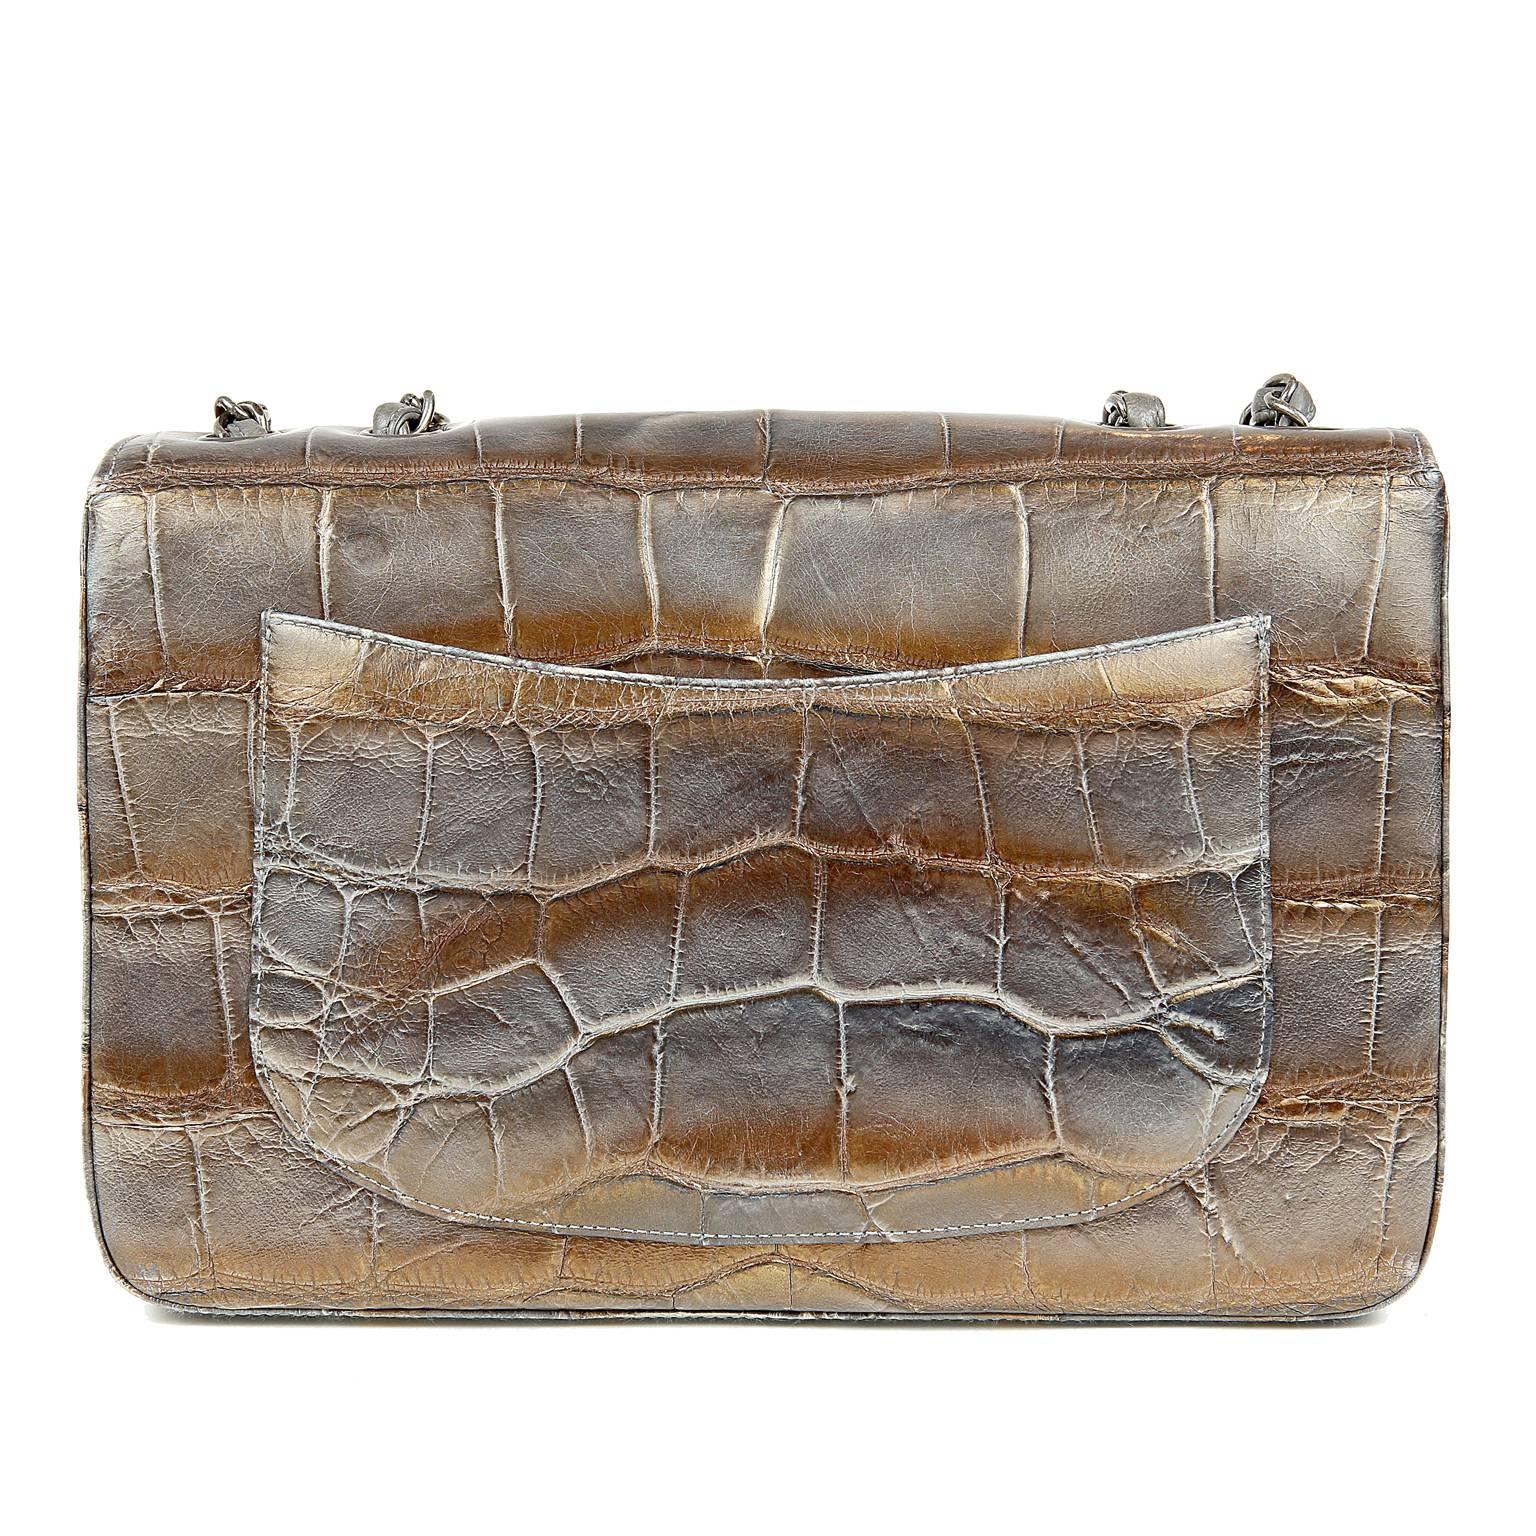 Chanel Pewter and Gold Crocodile Jumbo Classic- PRISTINE
 The striking combination of two tone metallic on crocodile skin is breathtaking; a must have for collectors. 

Single flap classic style in stunningly subtle pewter and gold crocodile skin. 